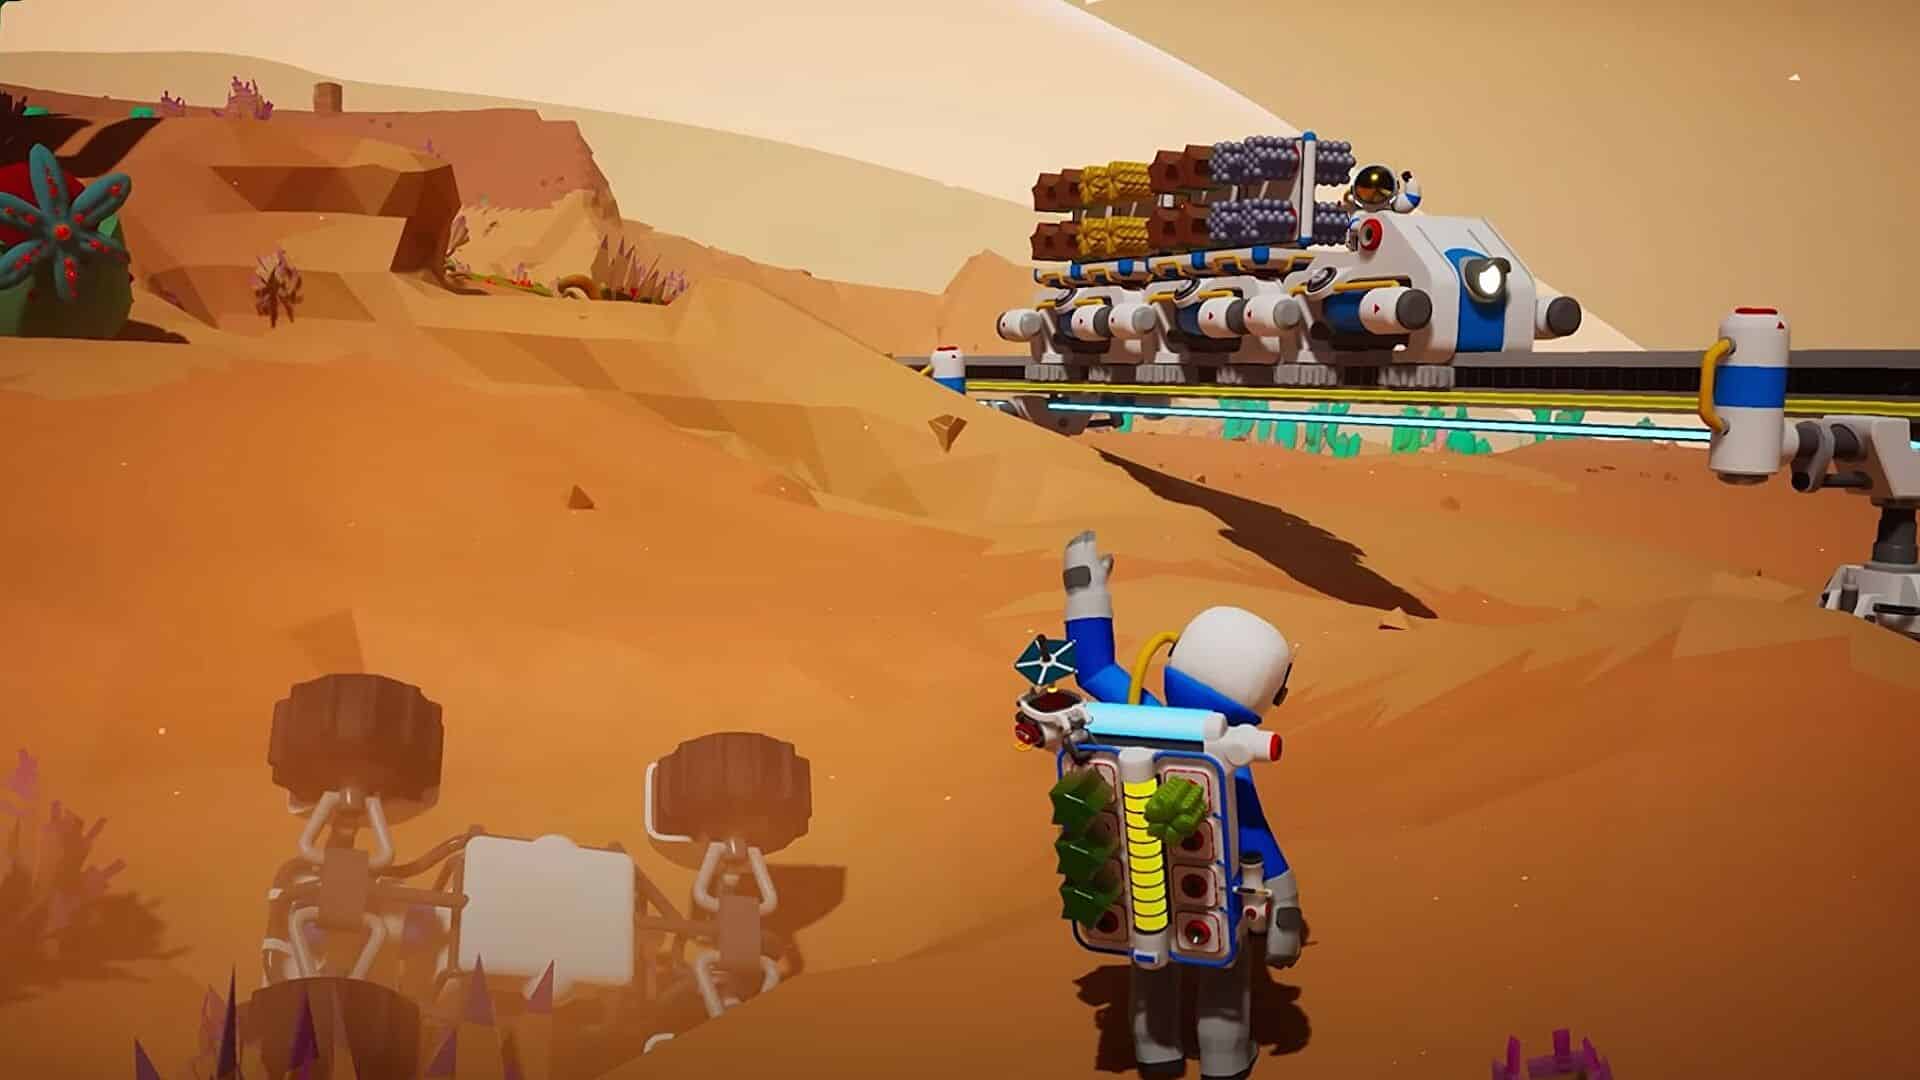 Take one giant chuff for mankind in Astroneer's rail update, out now